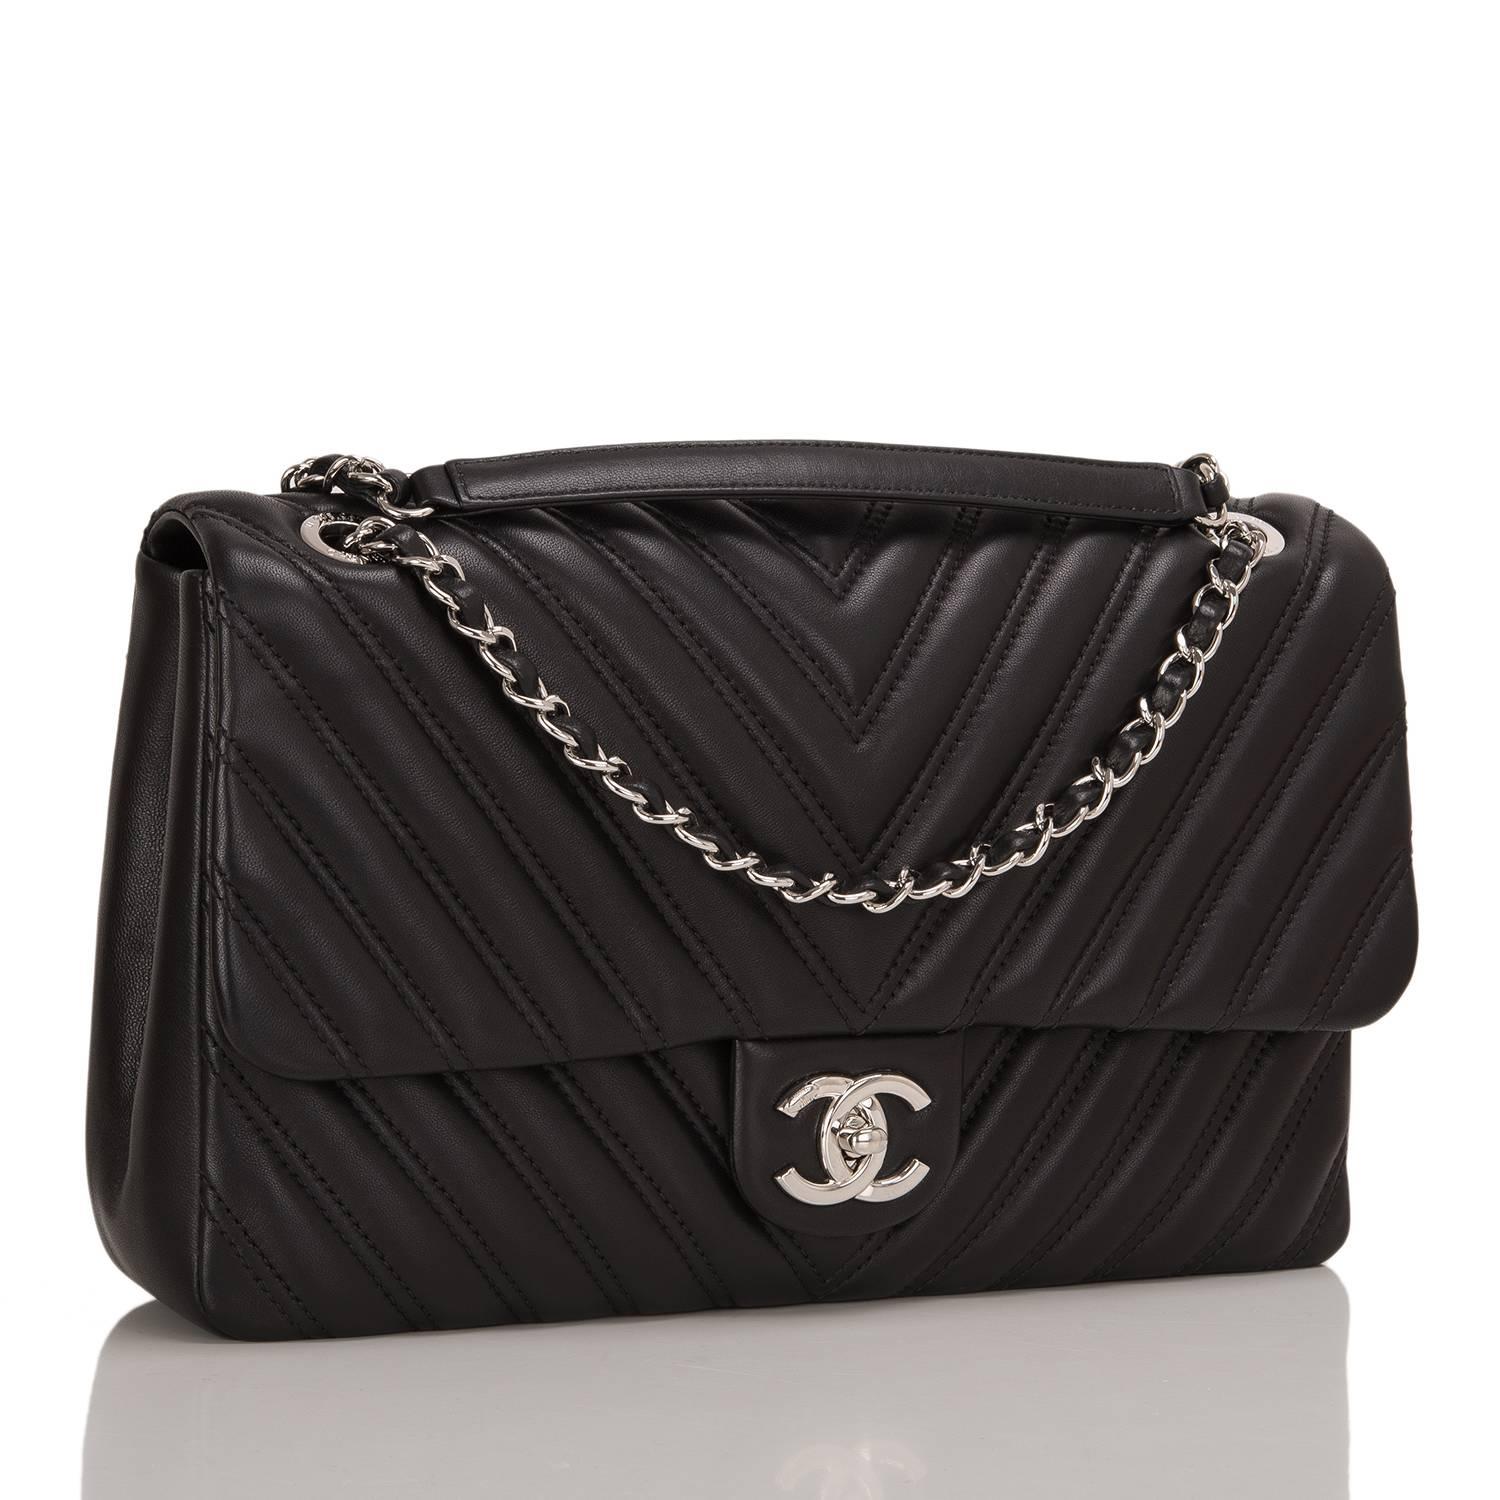 Chanel black Chevron Jumbo Flap bag of lambskin leather with silver tone hardware.

The bag features a front flap with signature CC turnlock closure, double stitched Chevron quilting, and an adjustable interwoven silver tone chain link and black